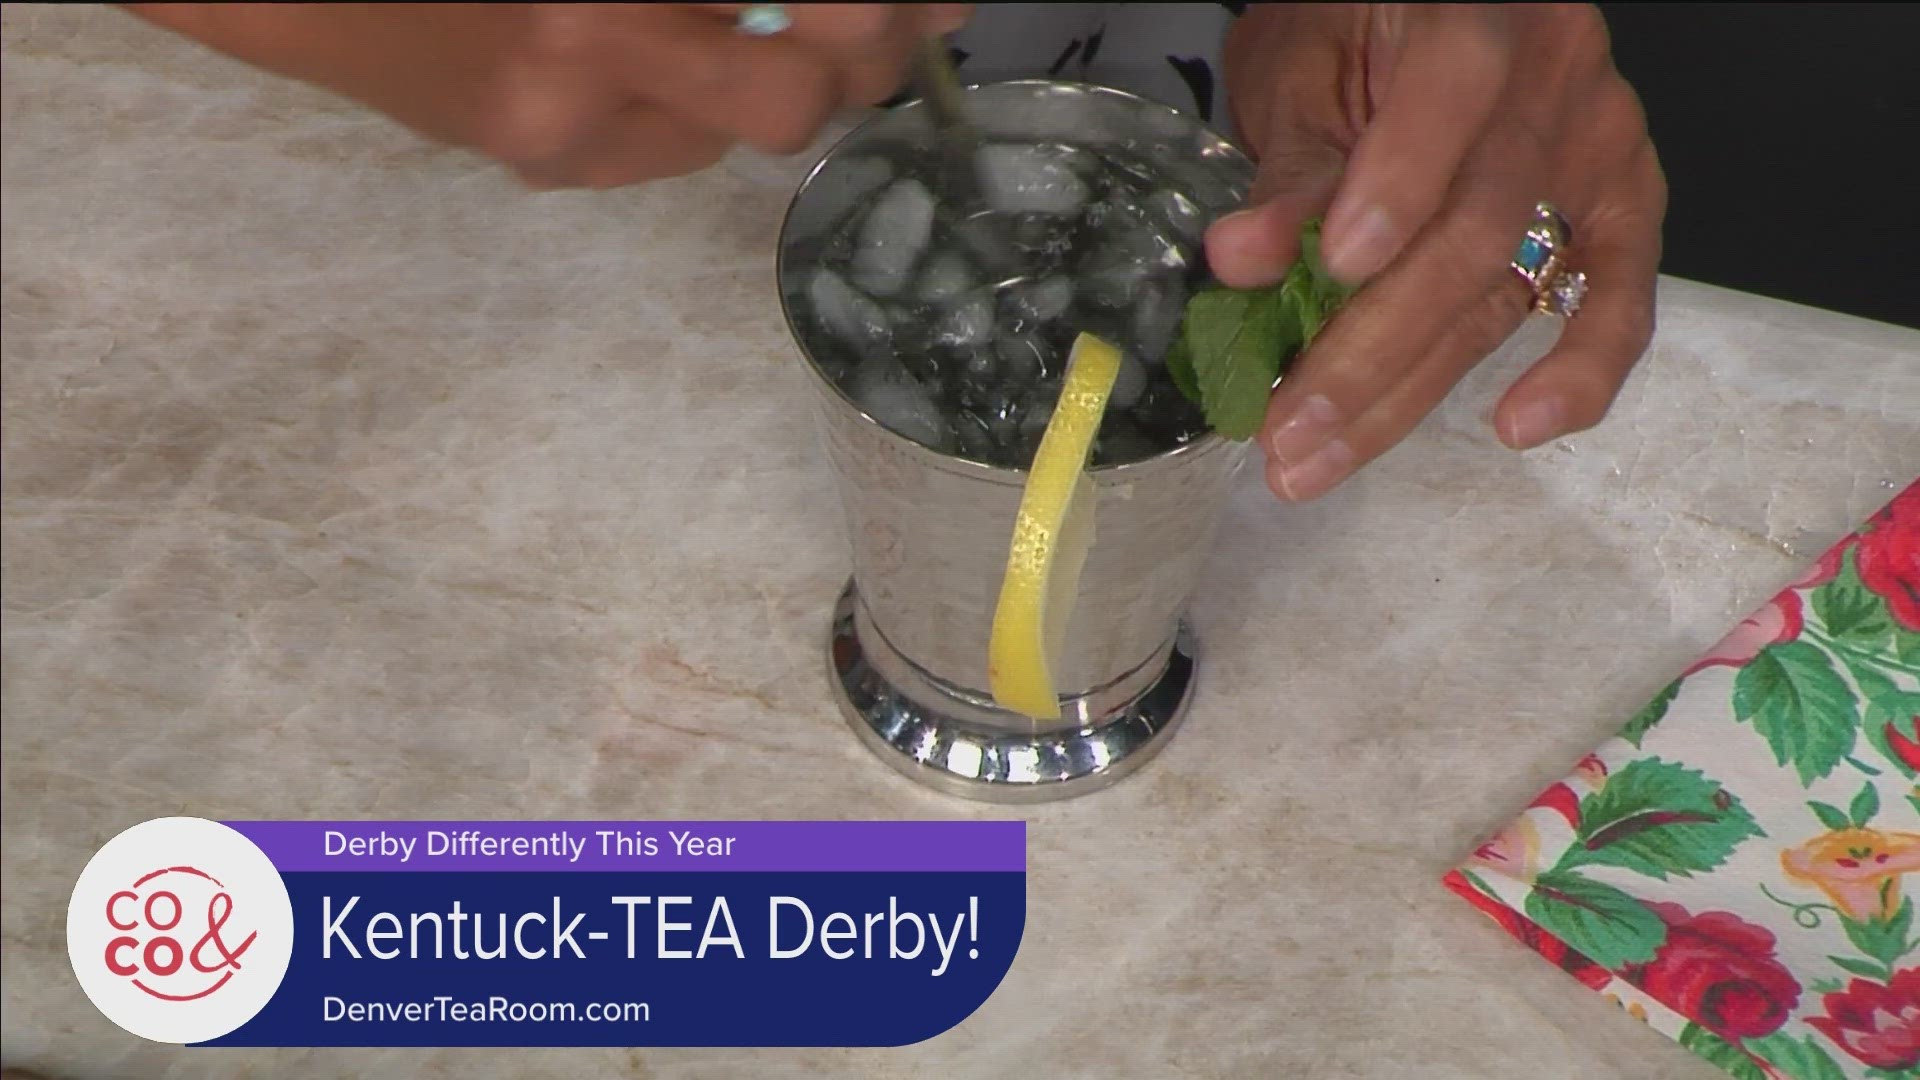 Celebrate the derby with teas and accessories from Denver Tea Room at DenverTeaRoom.com.